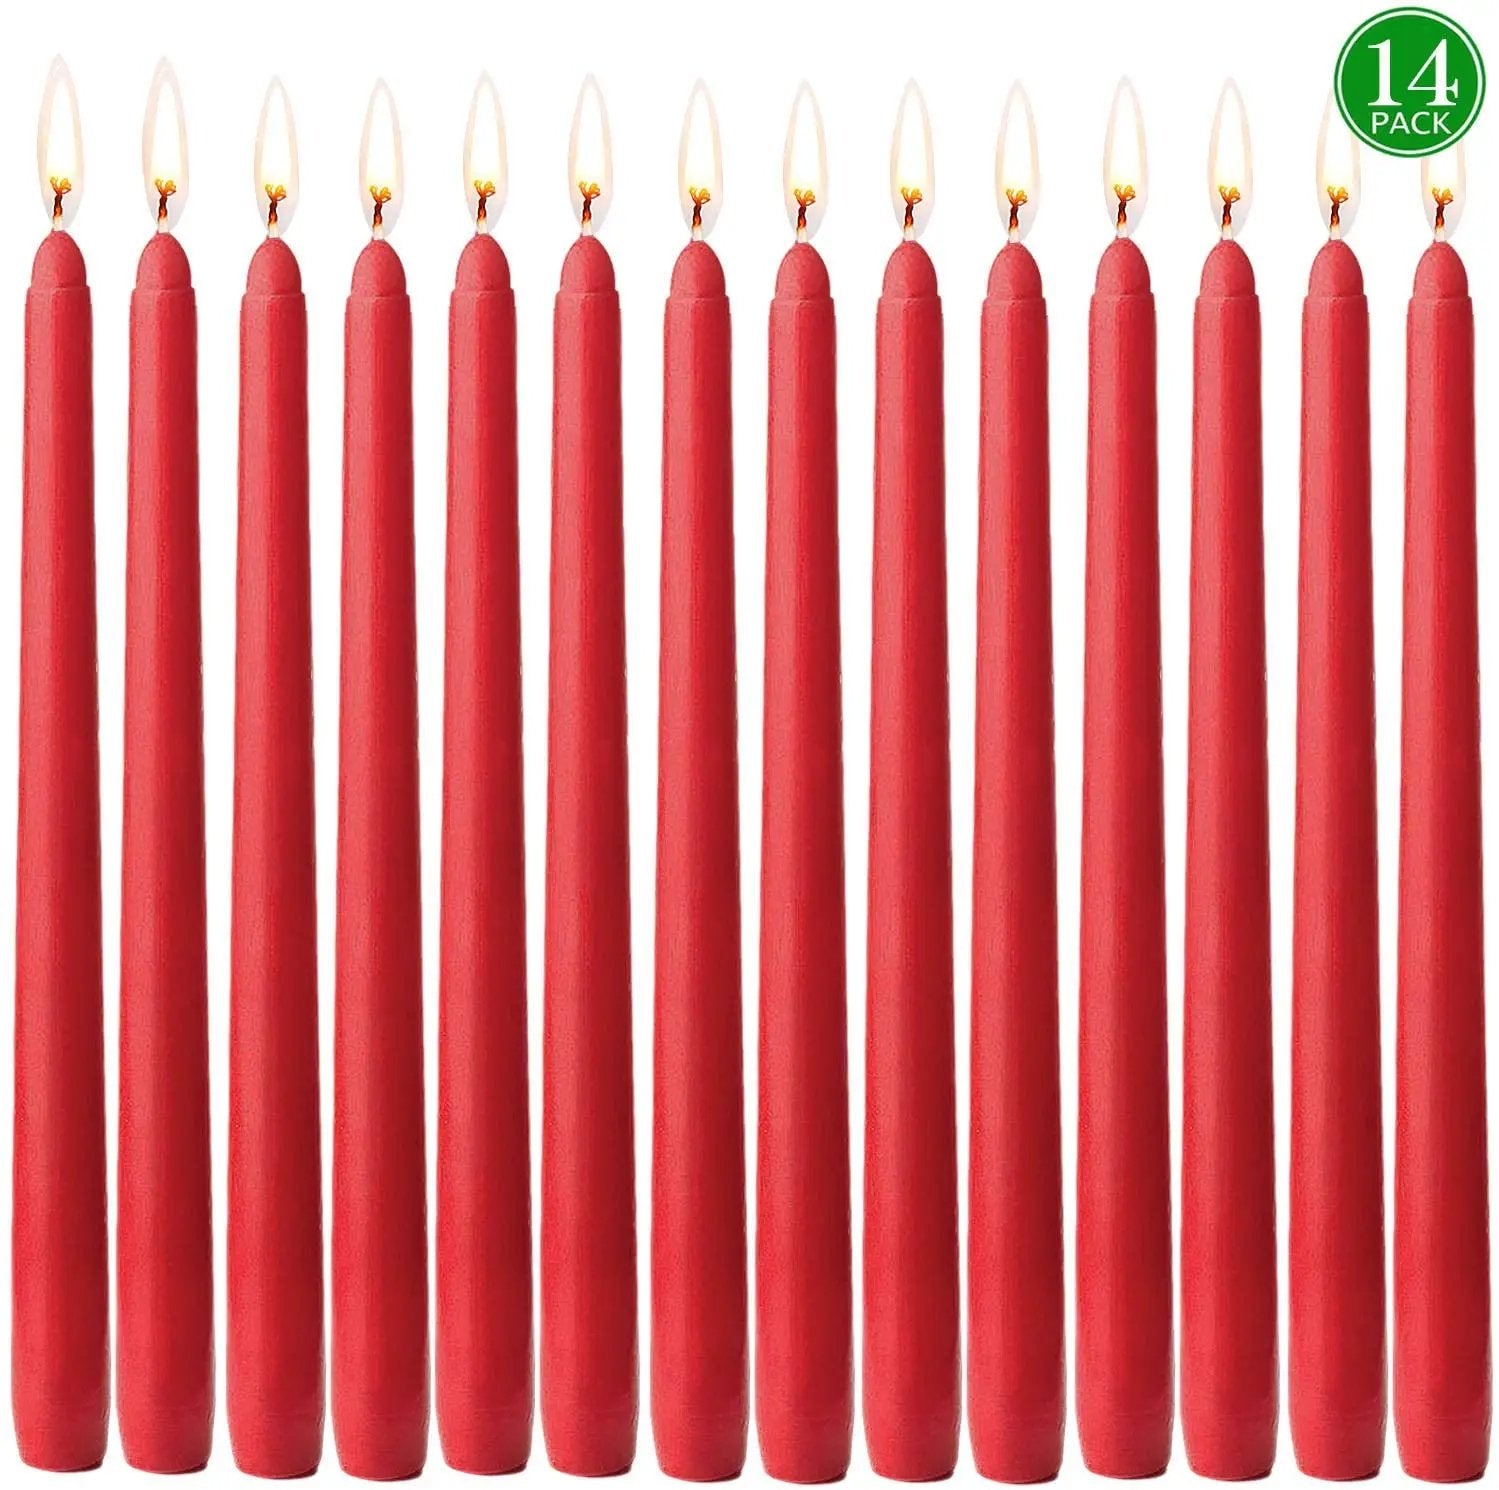 Red Taper Candles 10 Inches Tall Garden Plus